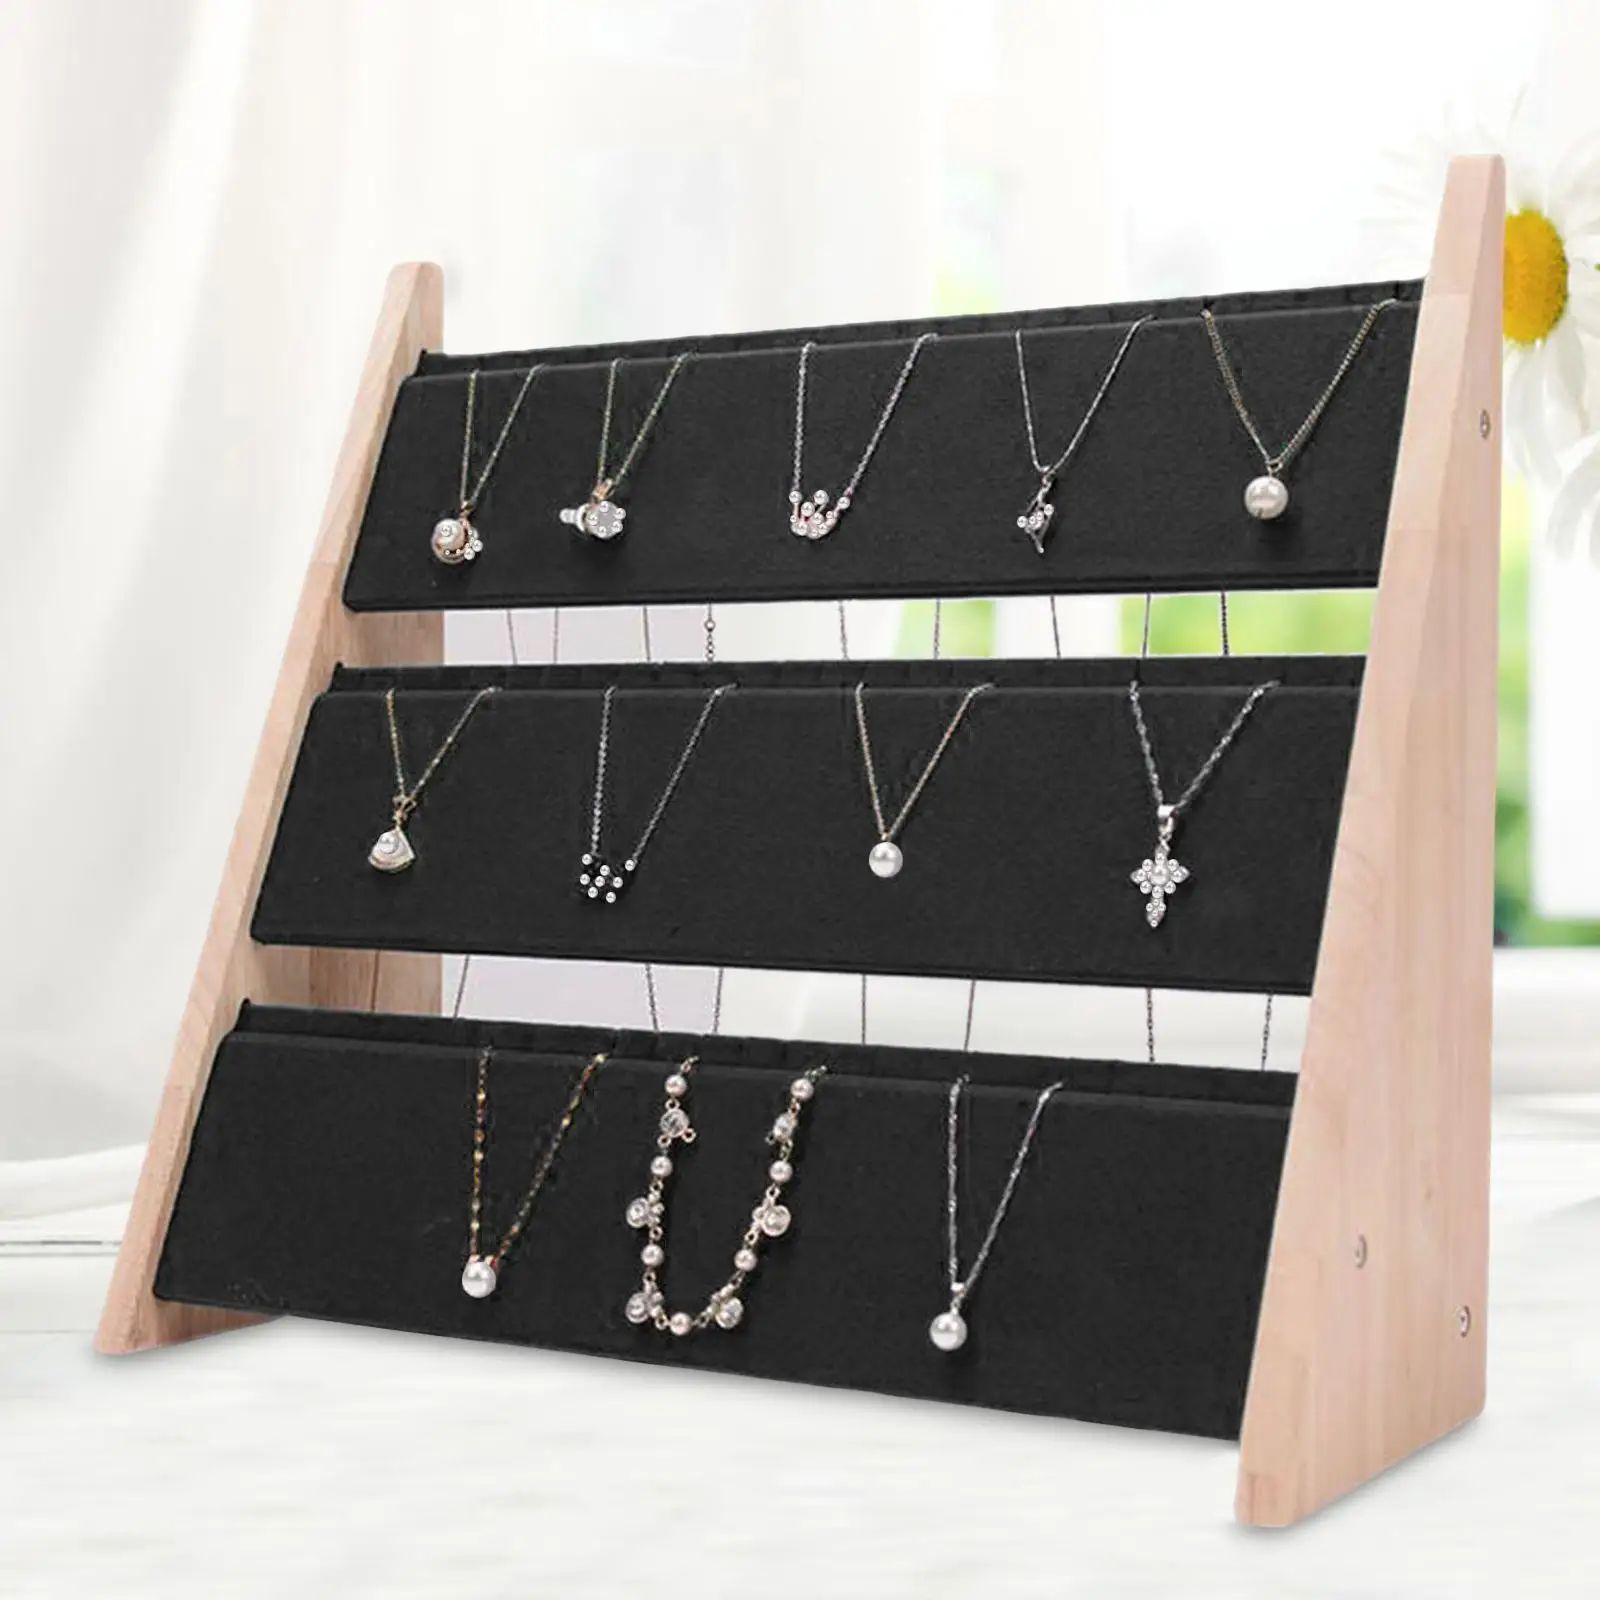 Necklace Display Stand Bracelet Storage for Chains Showcase Shelves Showcase